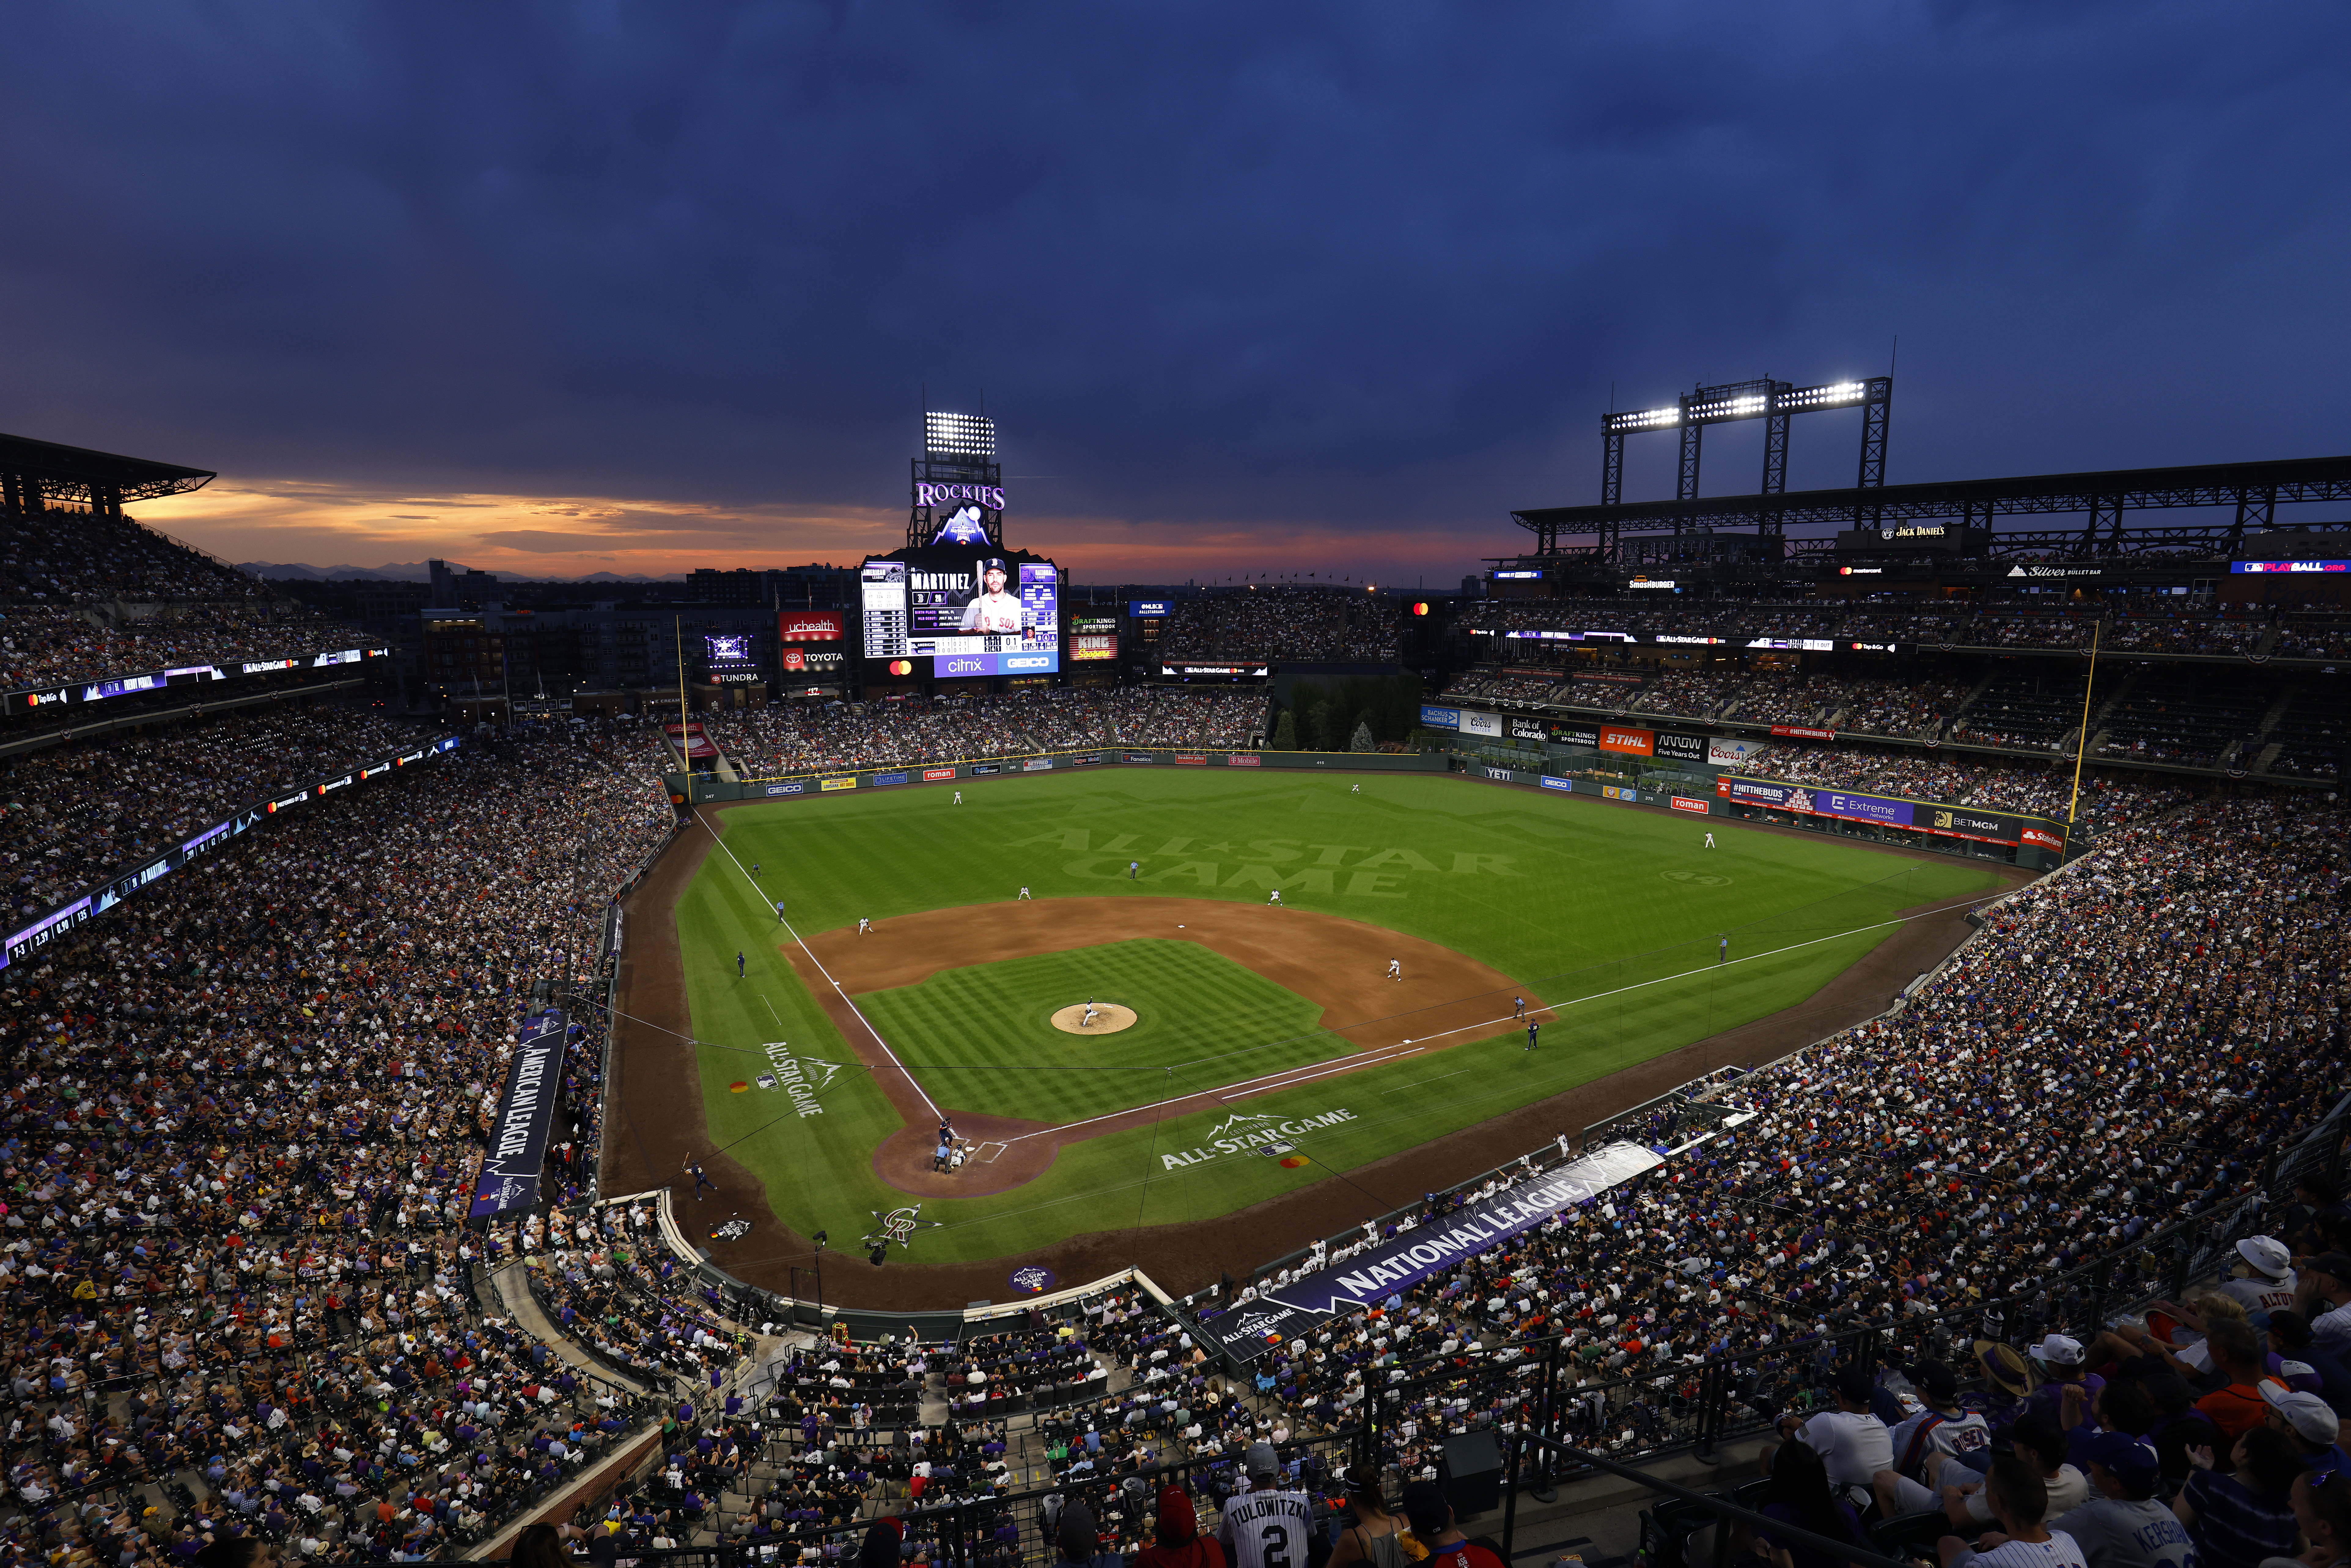 Rockies Journal: Coors Field is a wonder, but not because of home team